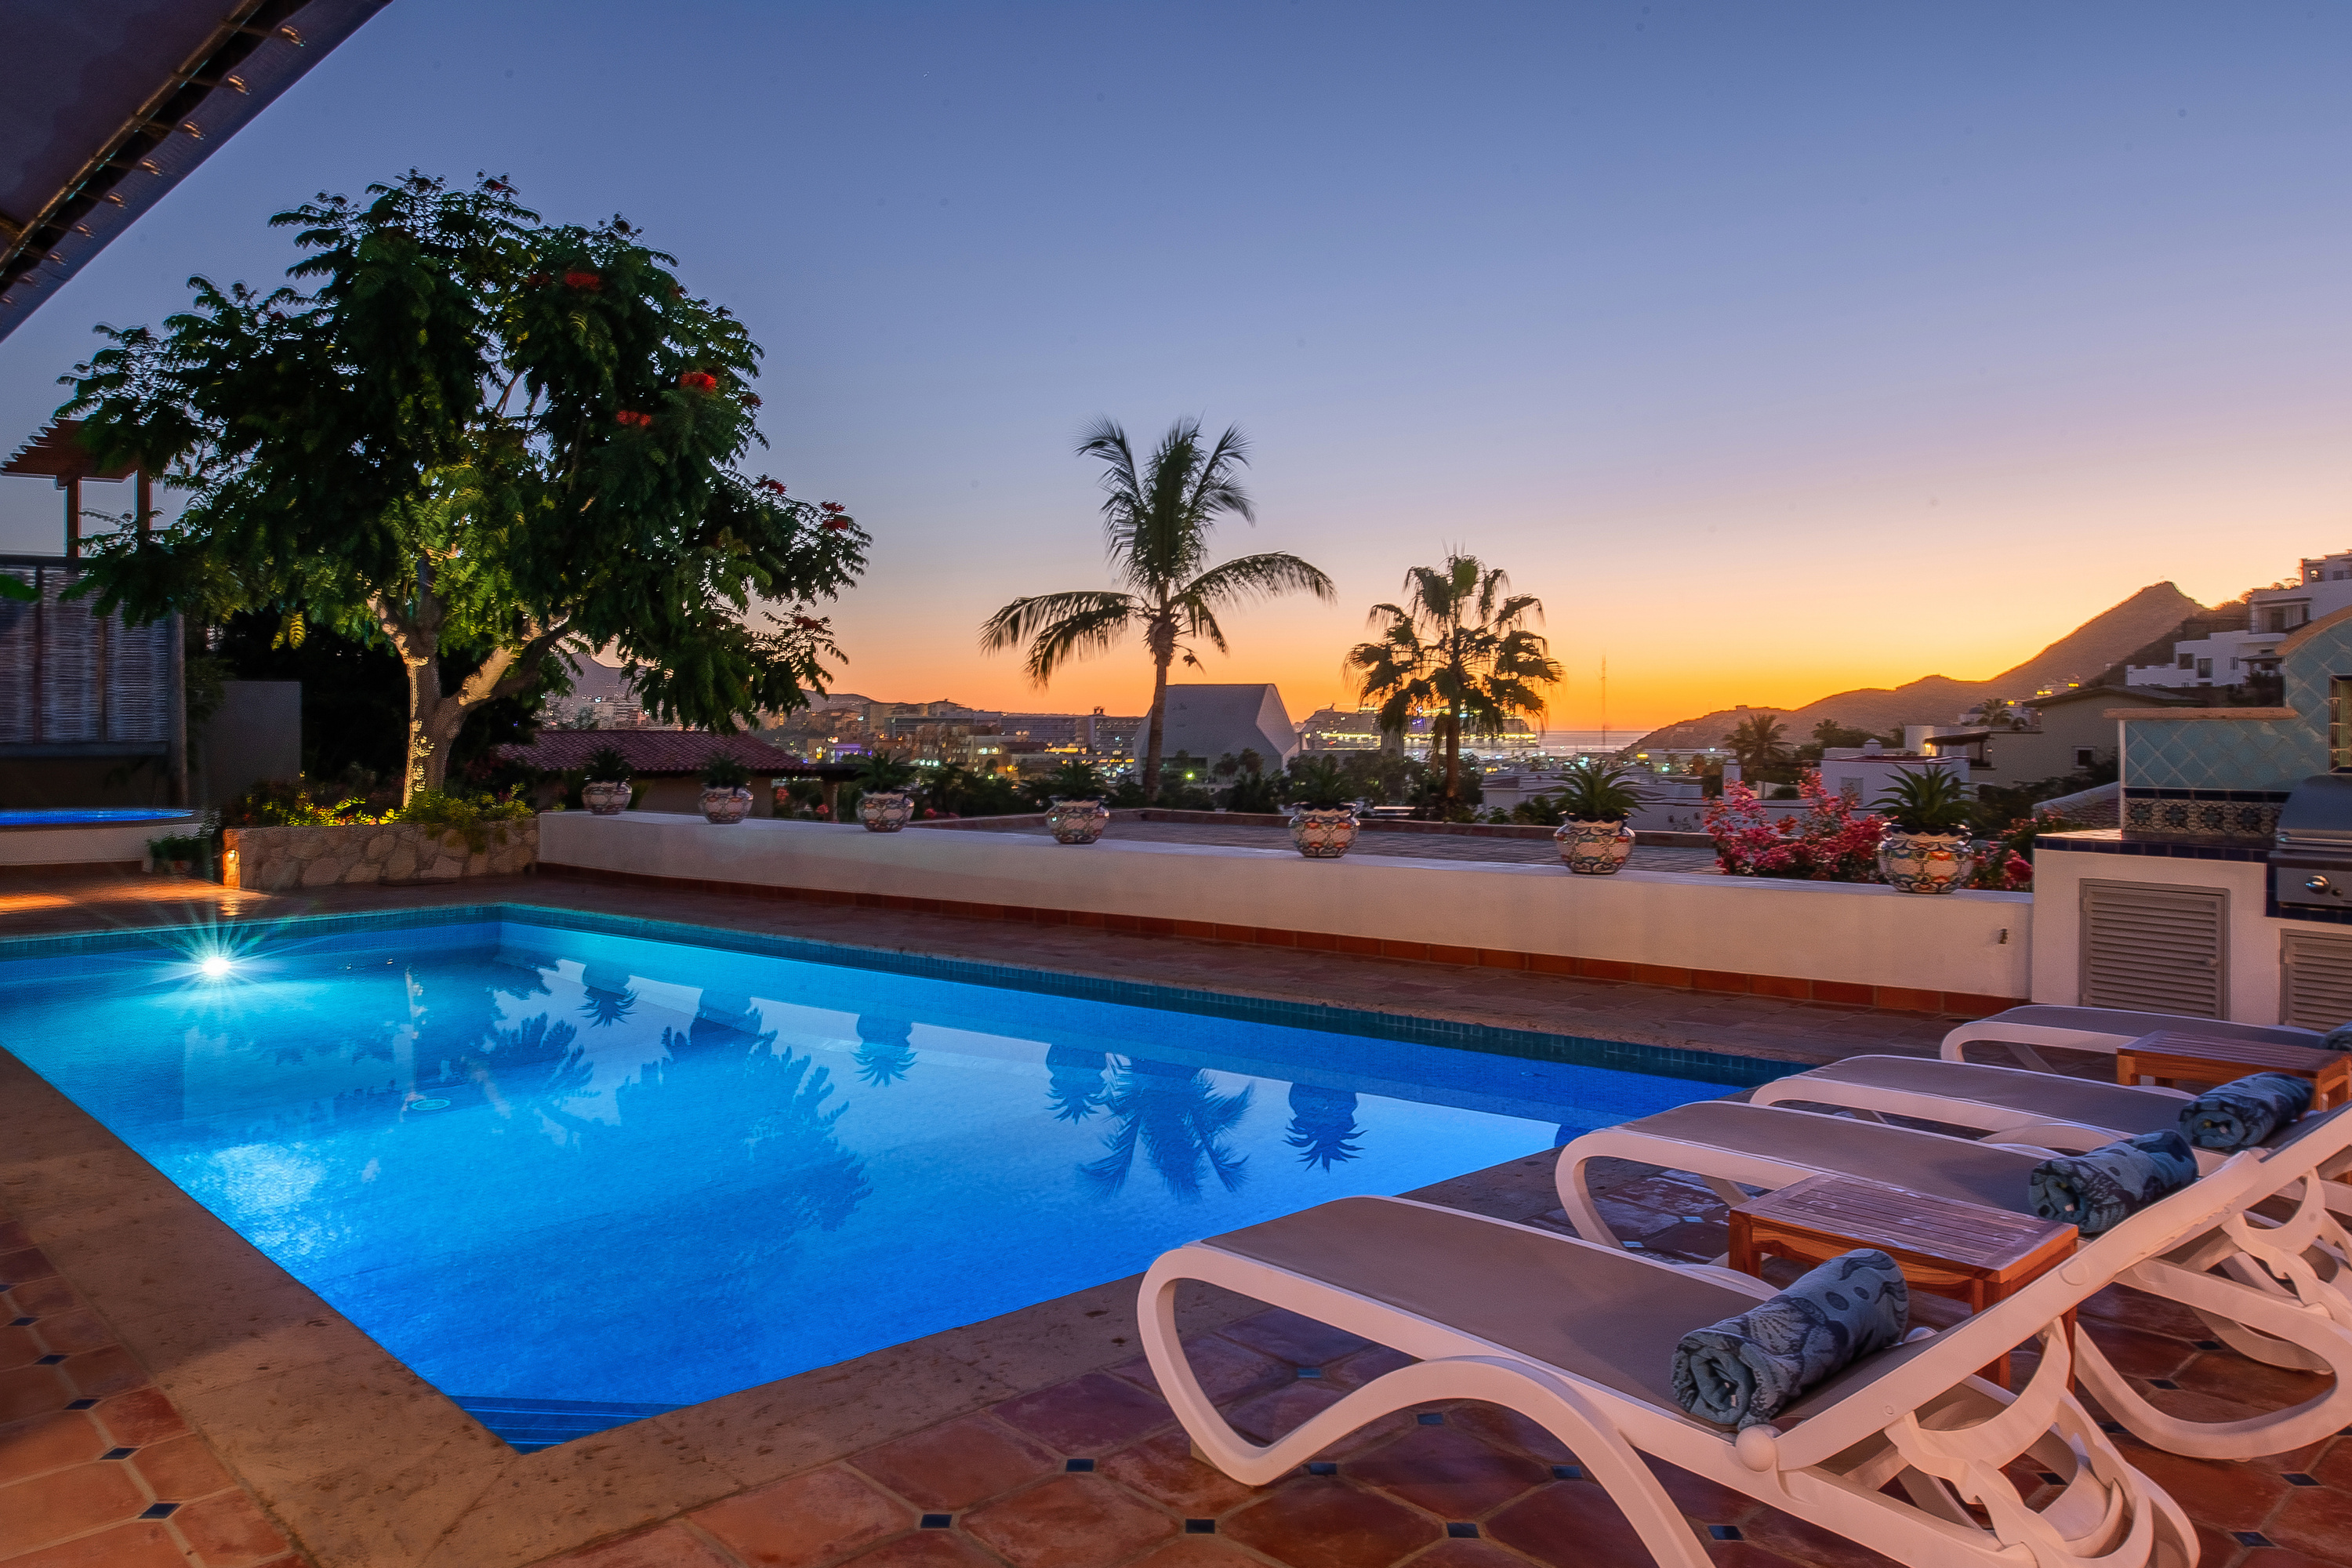 Incredible poolside during sunset